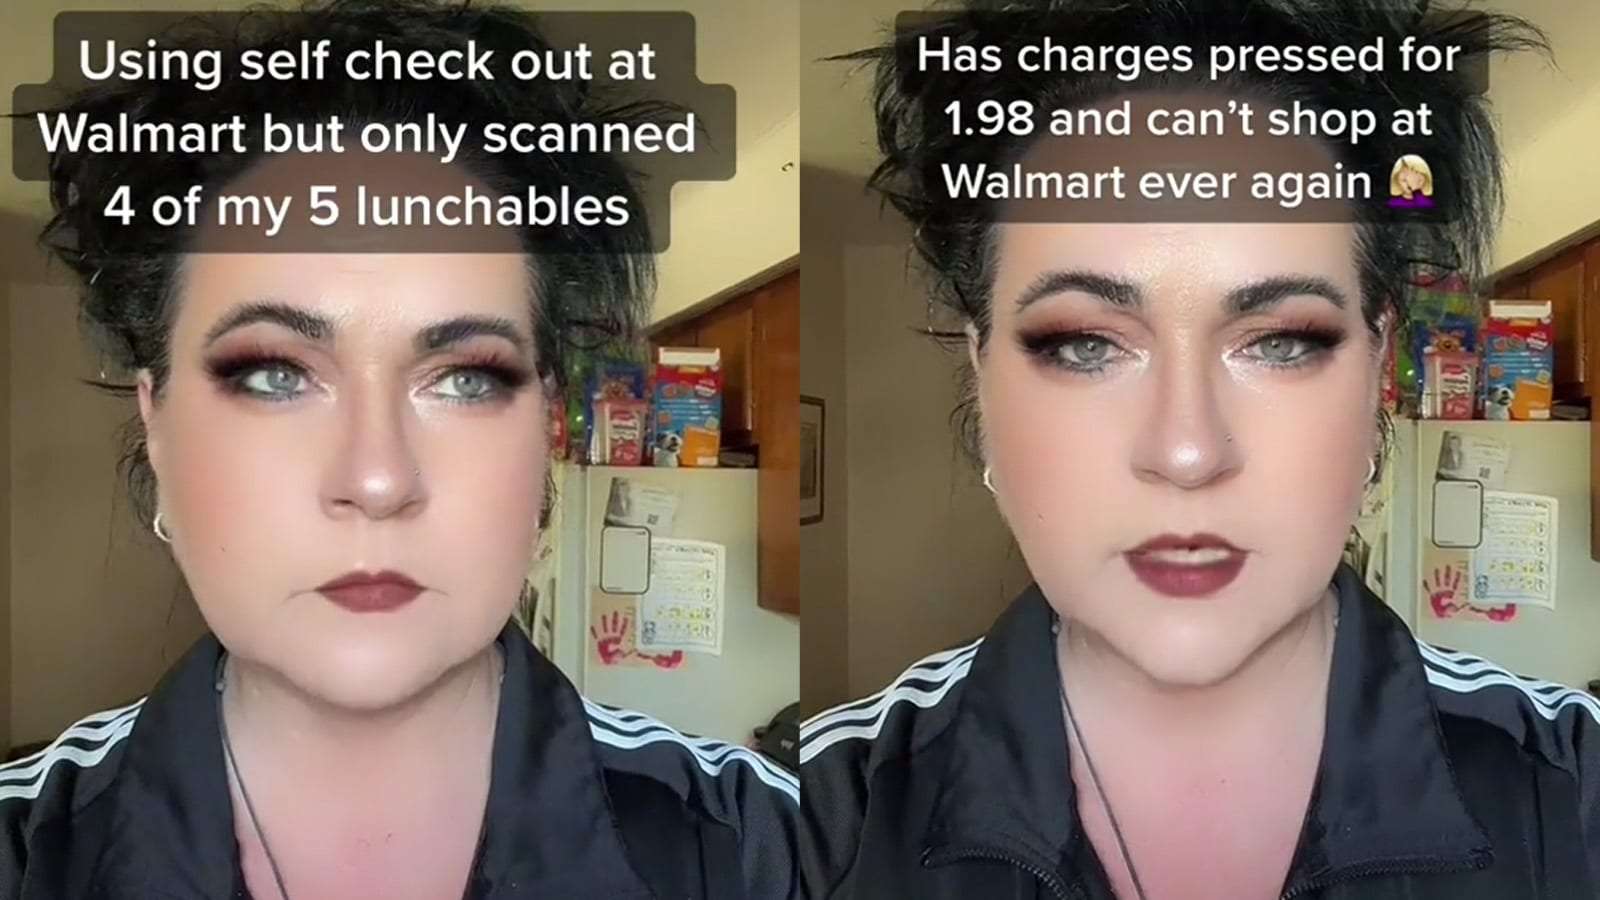 Woman Alleges She Was Fired From Walmart After Being Called 'Great Worker'  in Viral Video